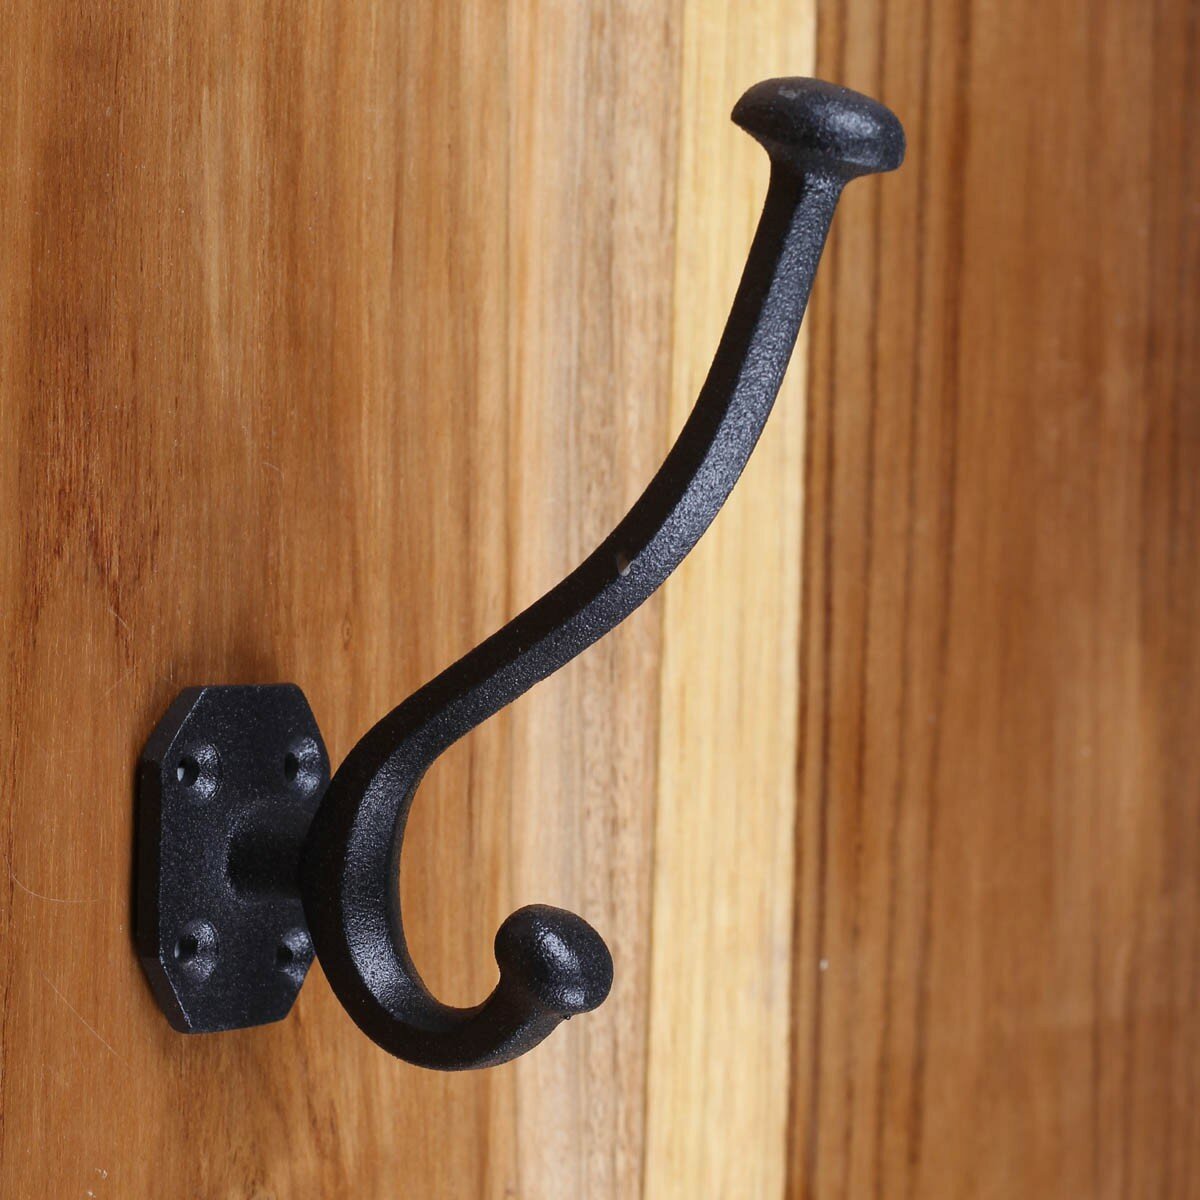 GlideRite Antique Brass Robe and Coat Hooks (Pack of 10)